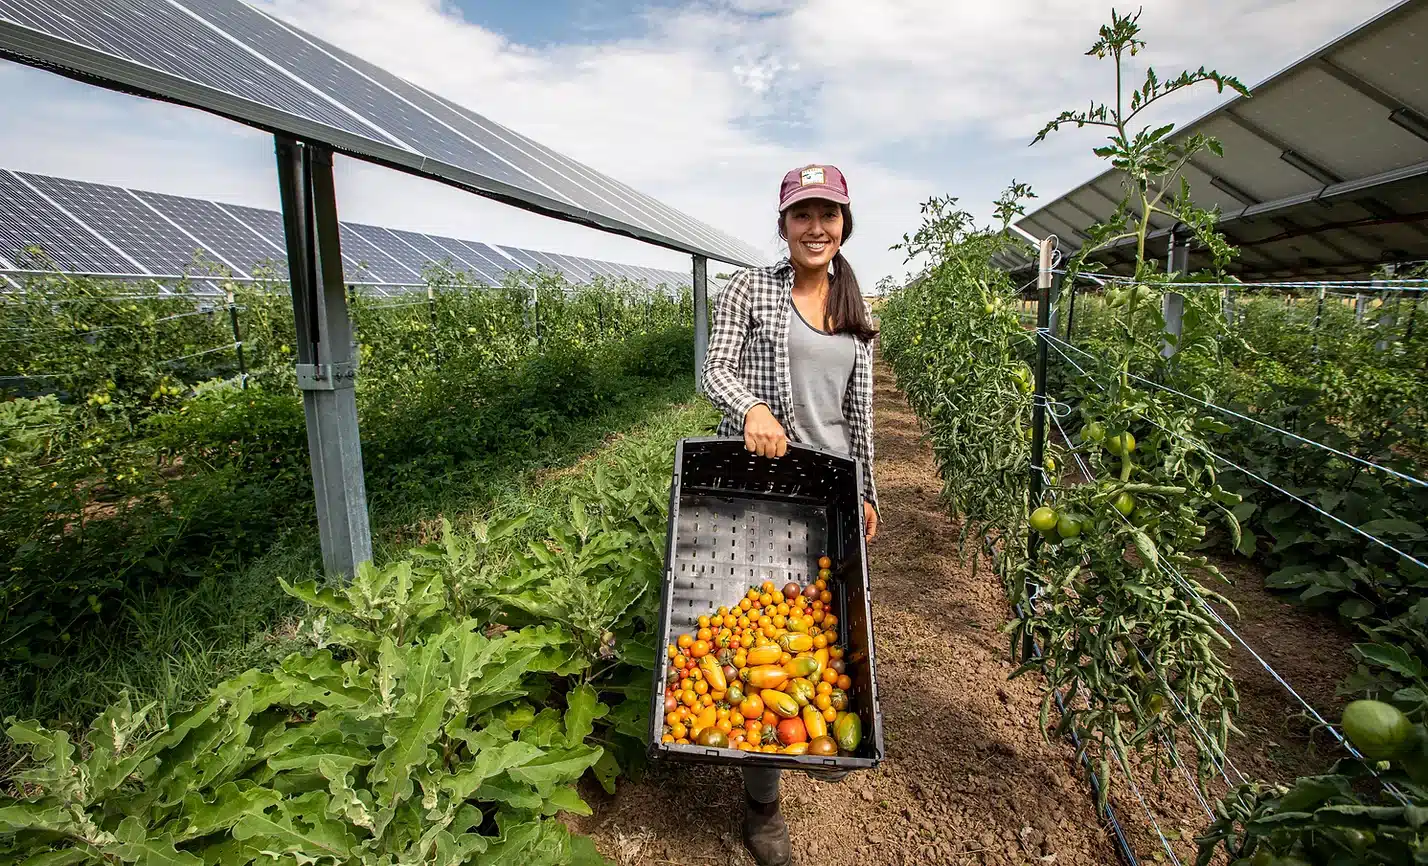 Woman standing between crop rows on a farm holding a container of harvested heirloom tomatoes with solar panel arrays installed above the rows